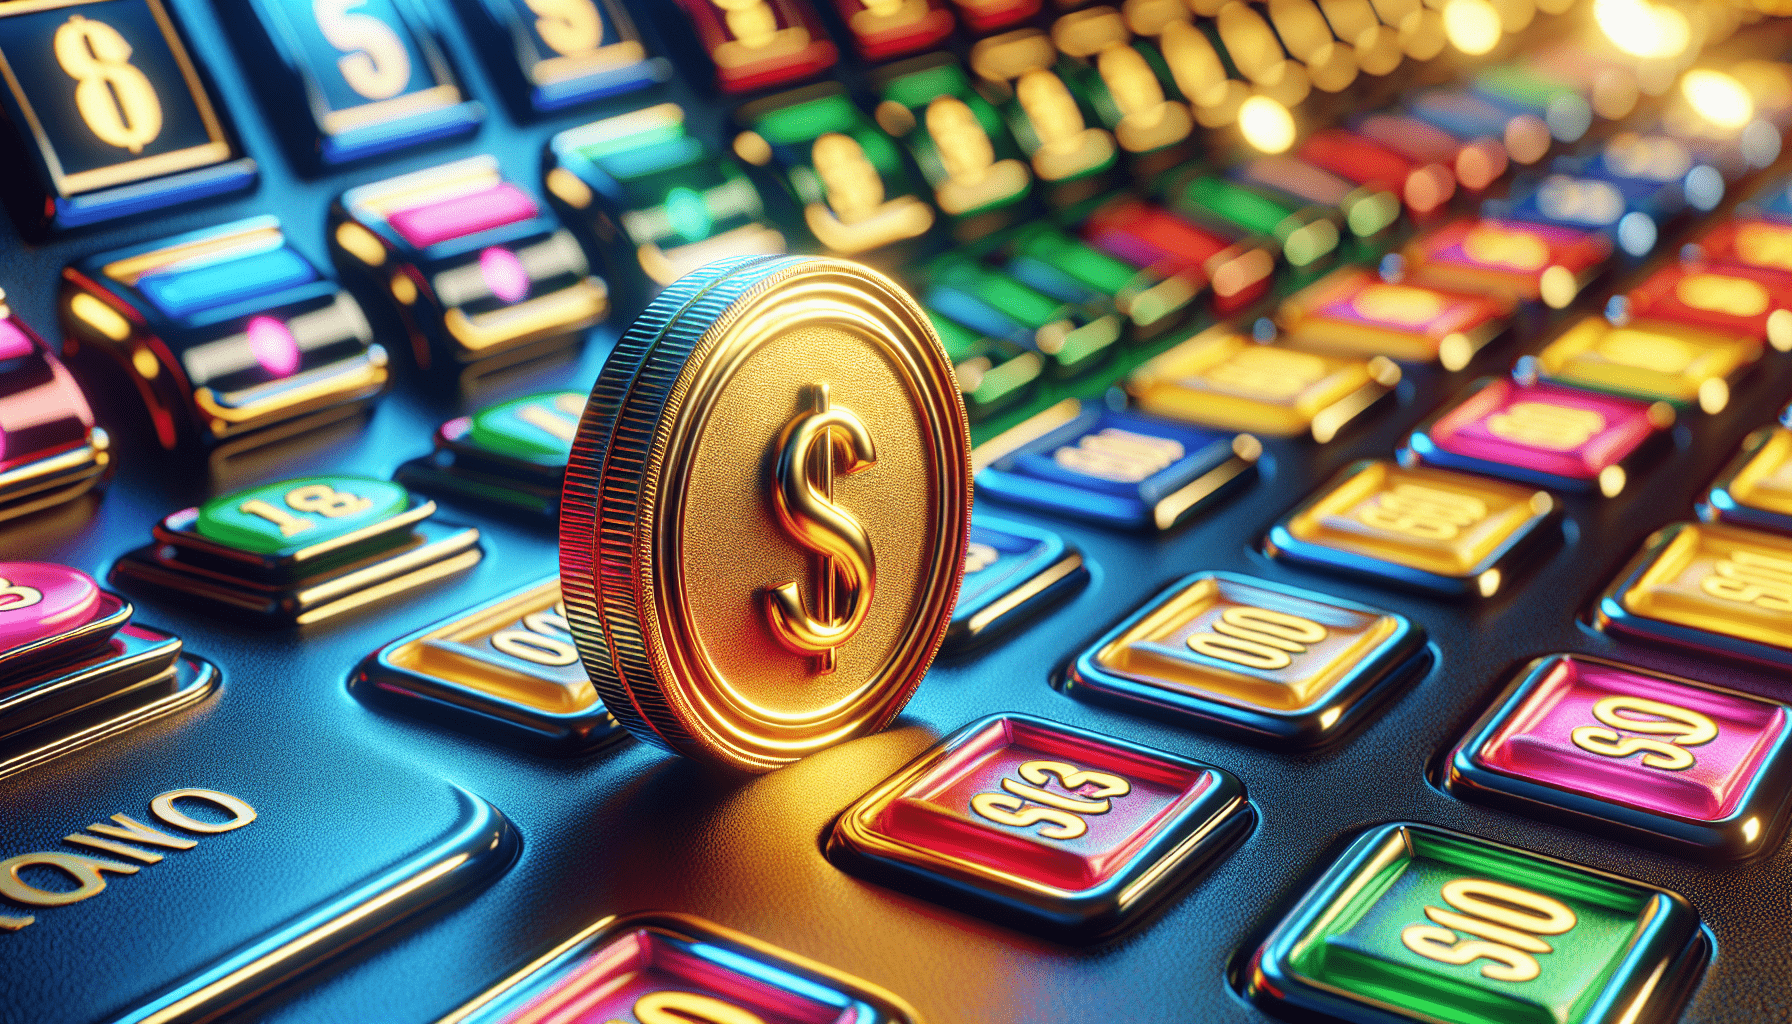 Is There An Algorithm For Winning Slot Machines?